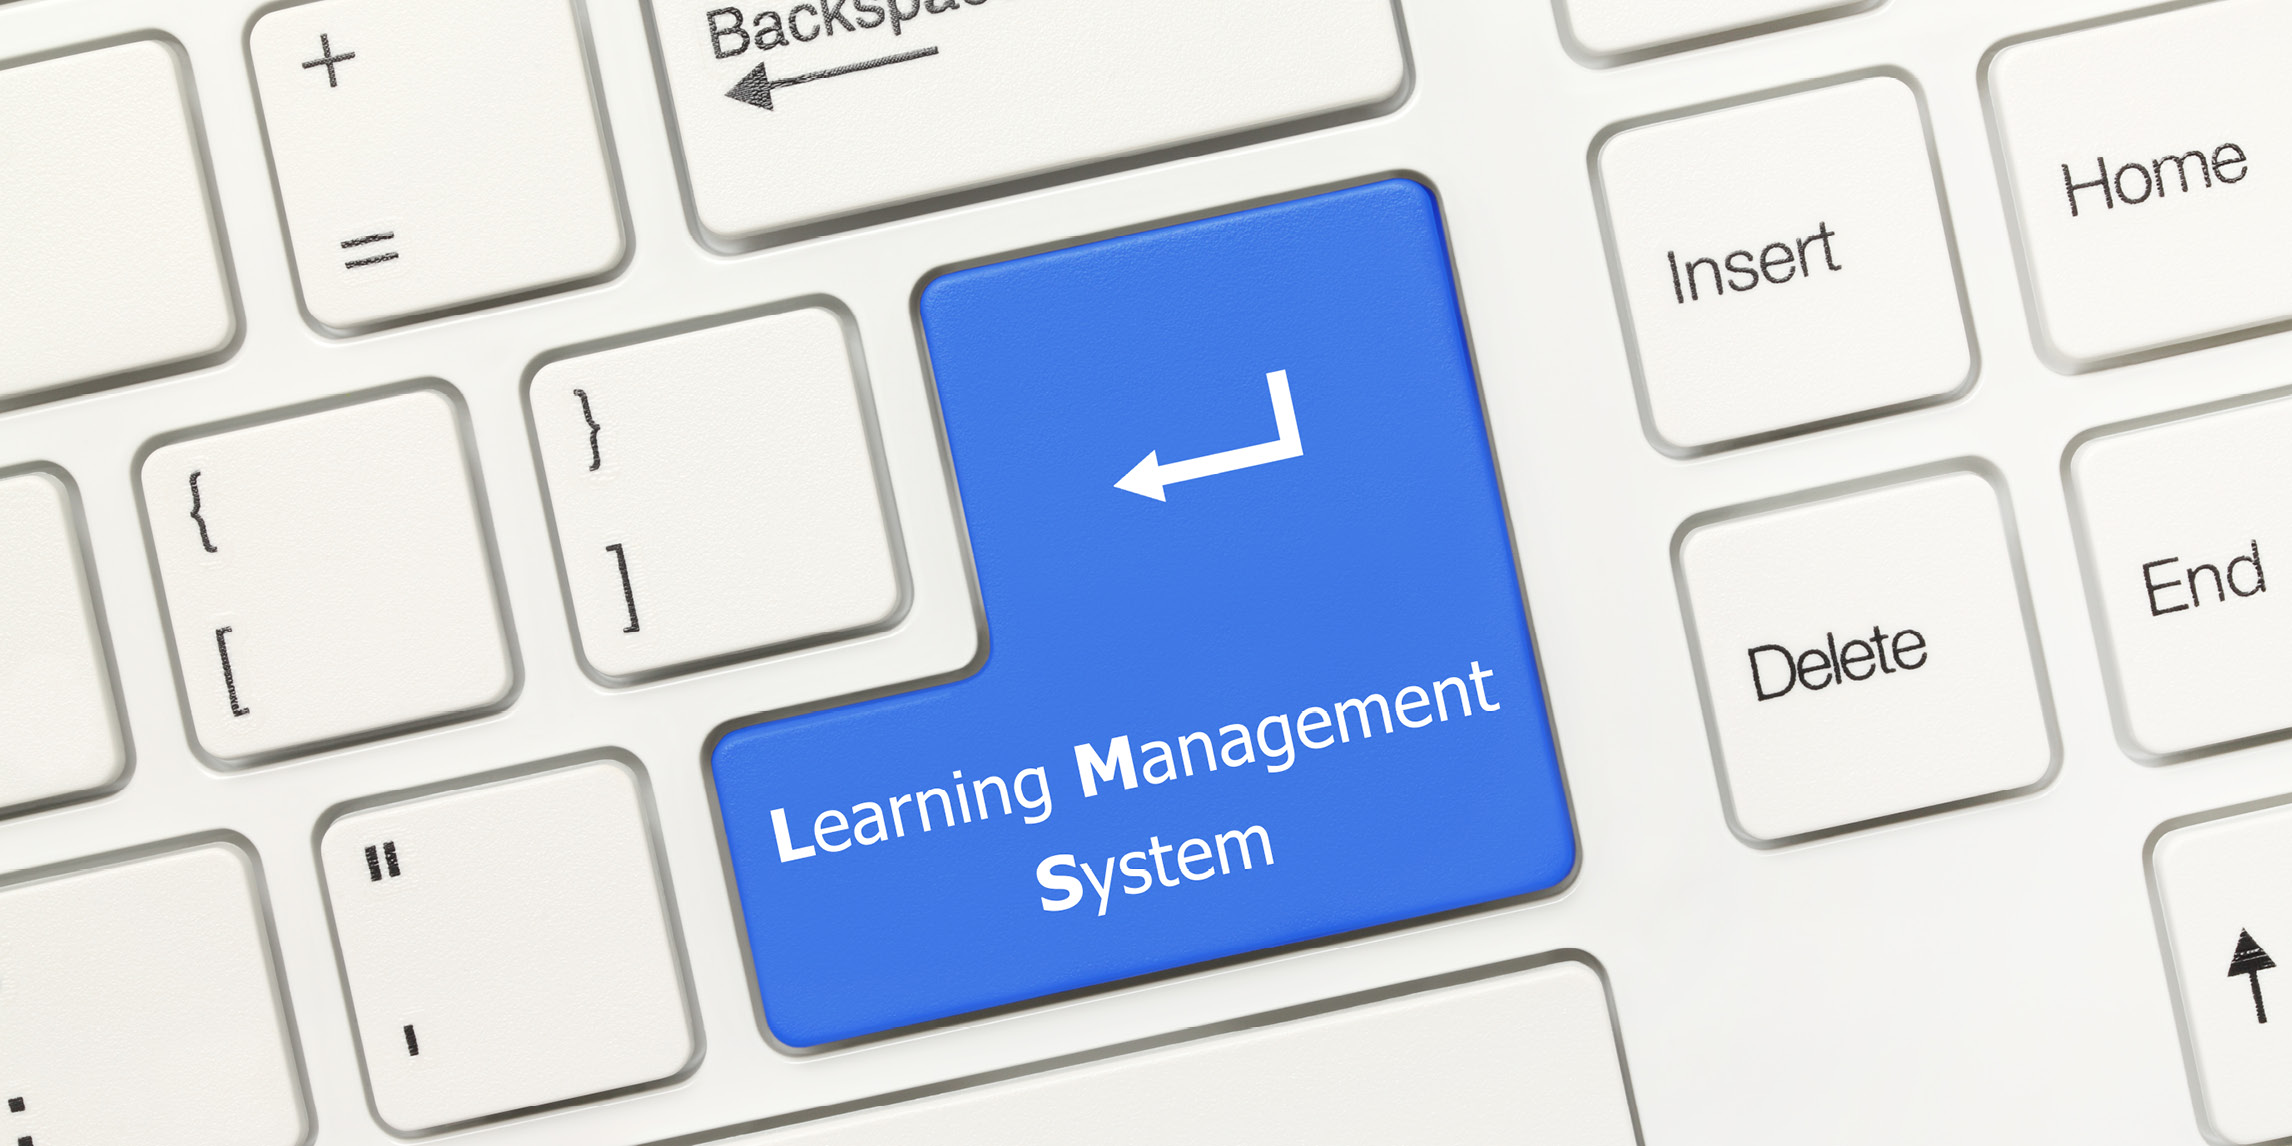 The Return key on a keyboard reading Learning Management System